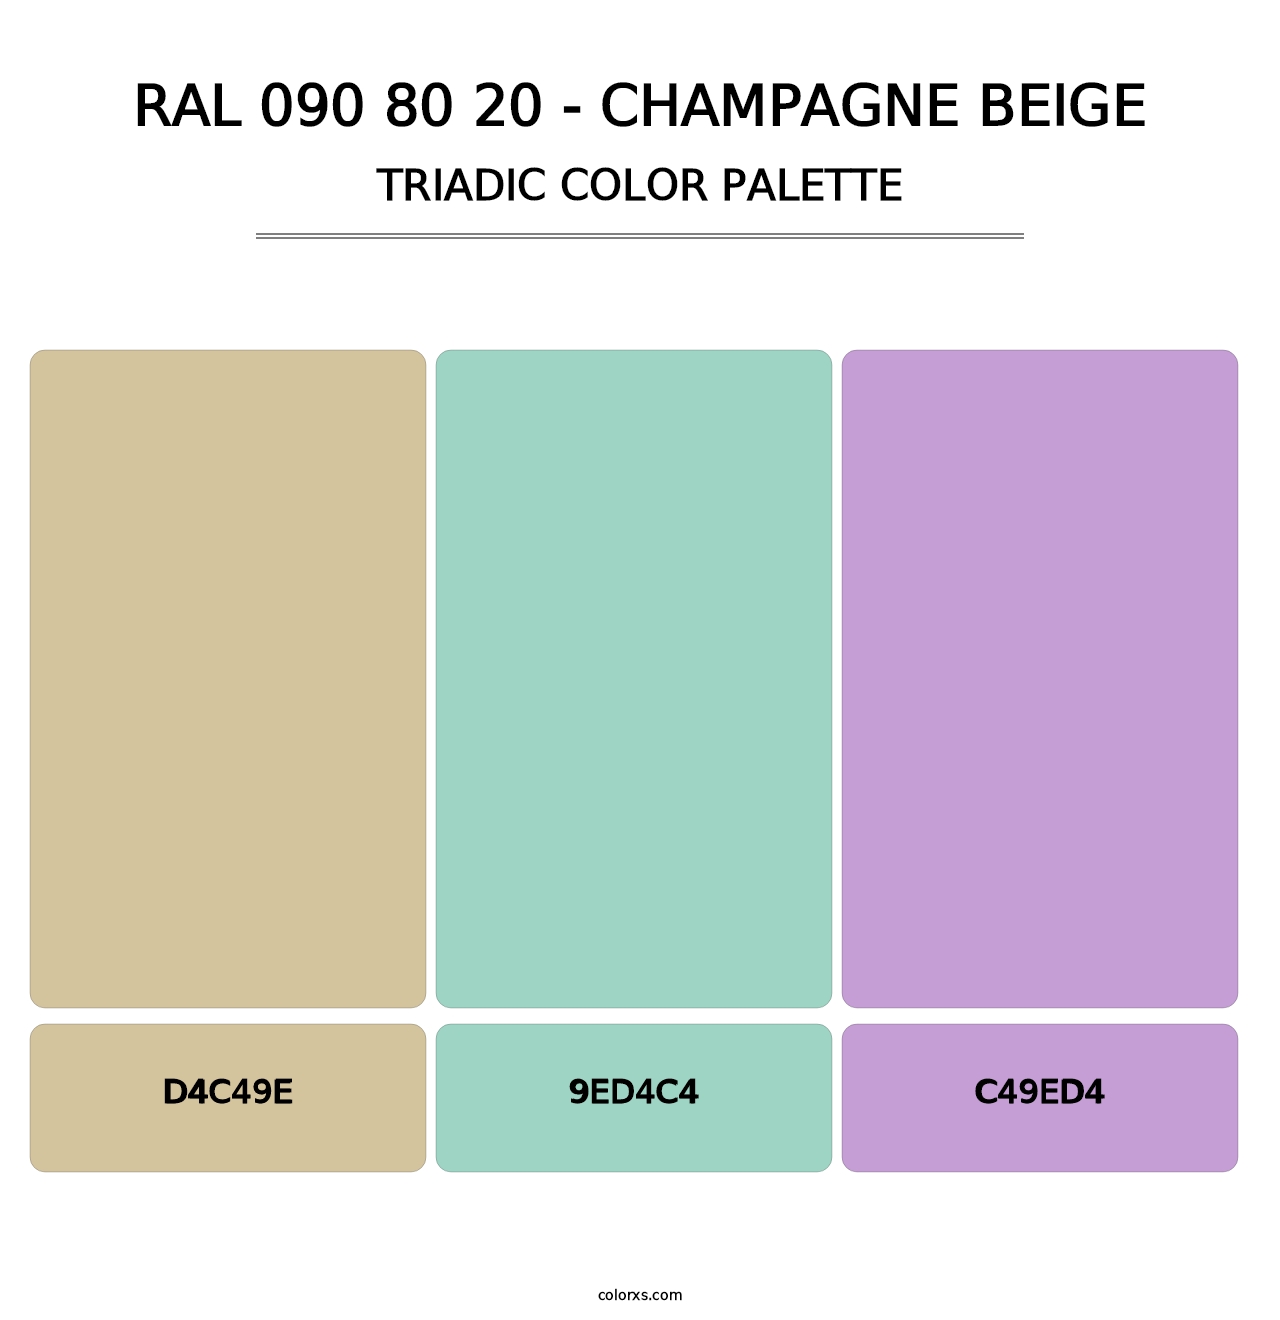 RAL 090 80 20 - Champagne Beige - Triadic Color Palette